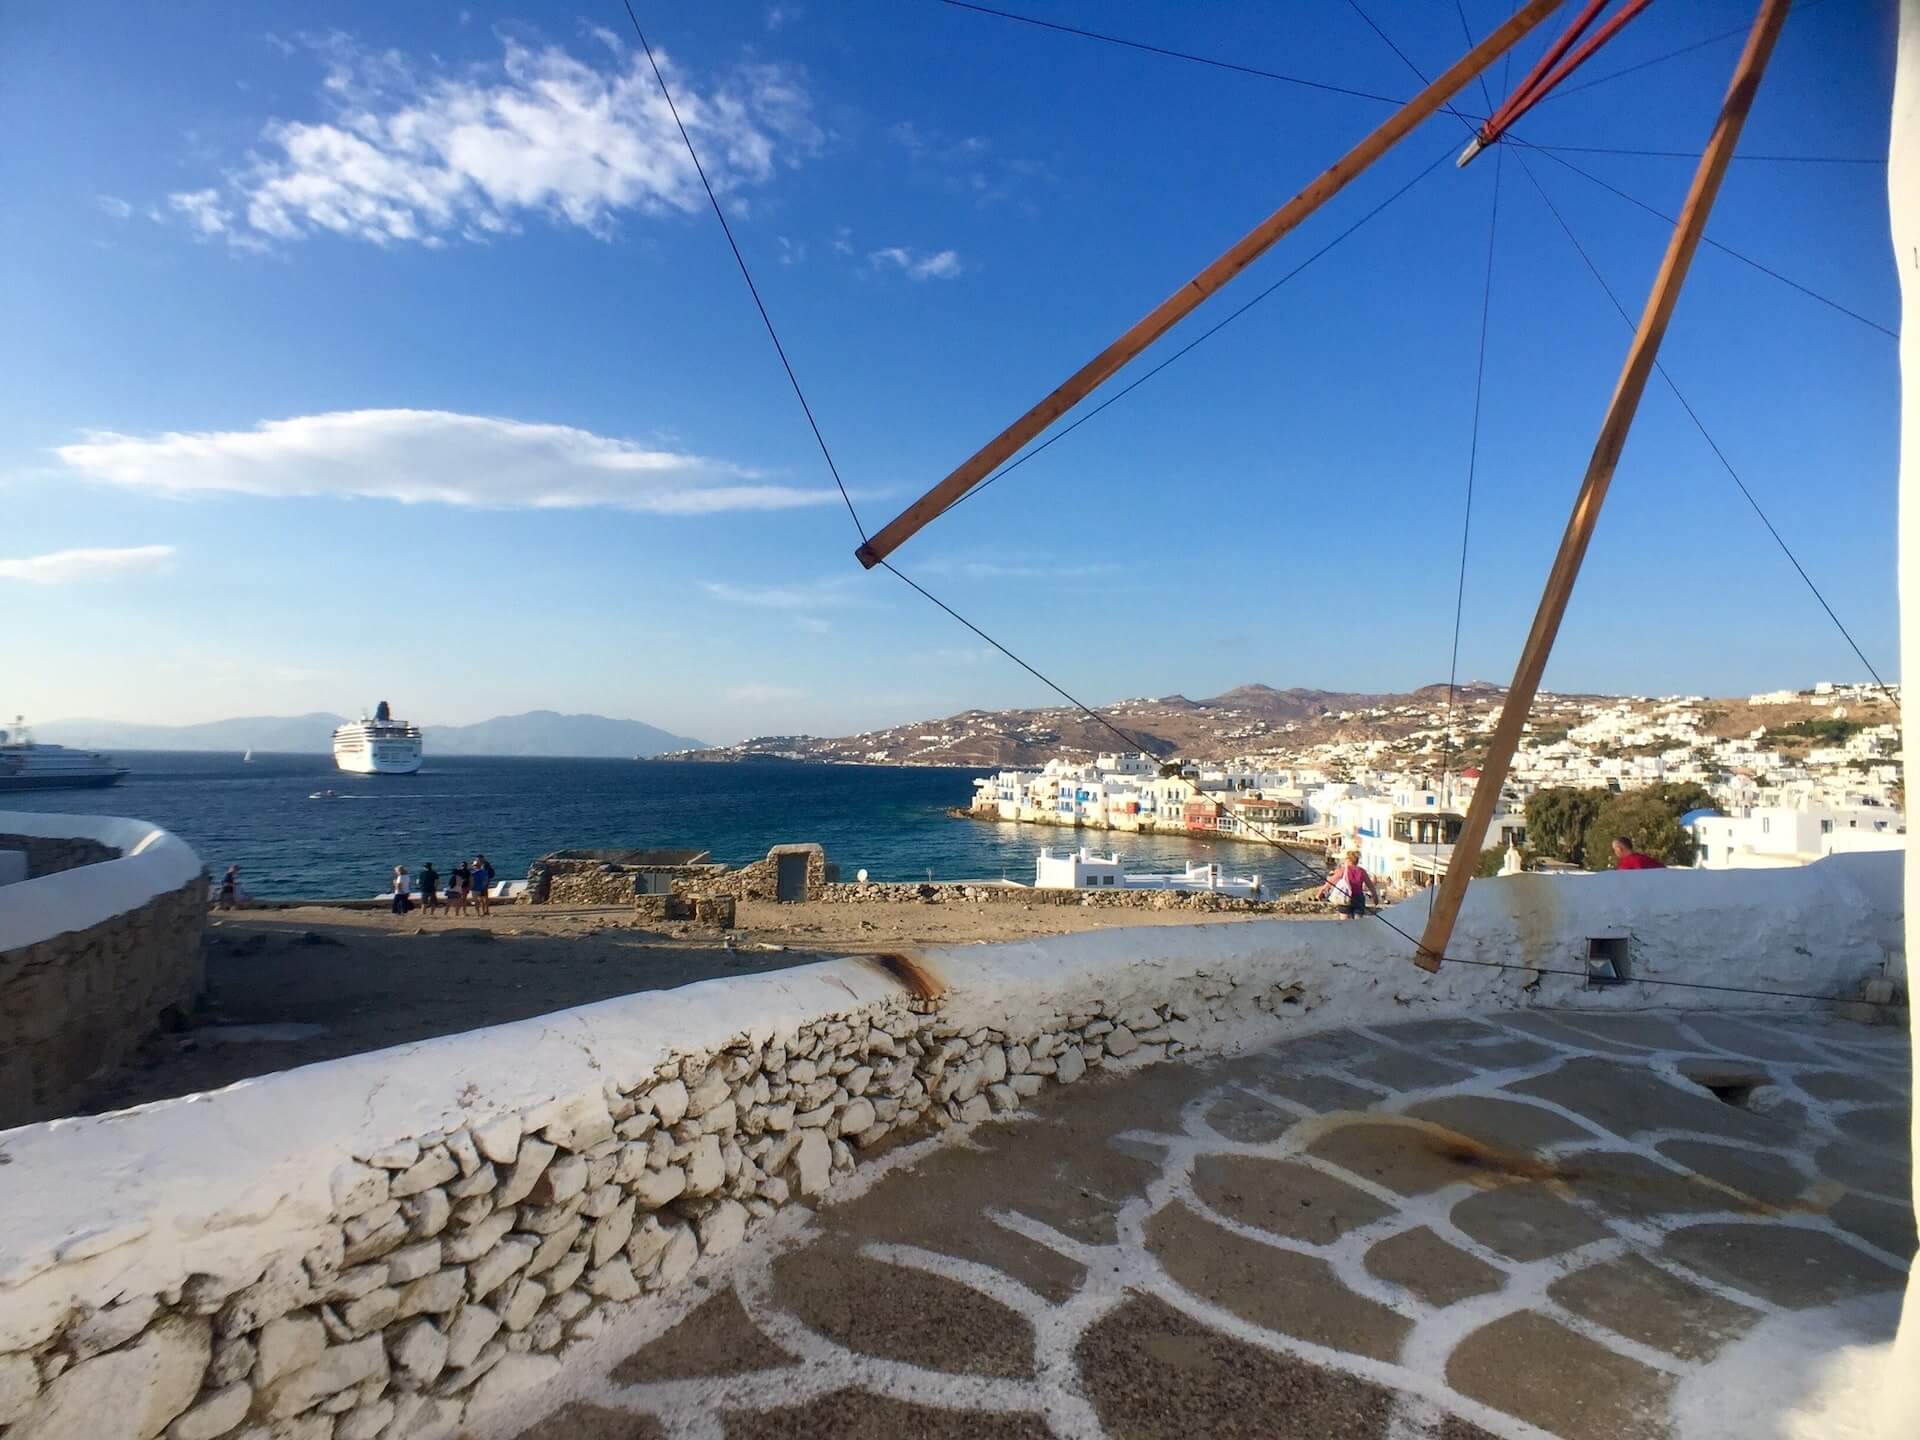 1 day in Mykonos, windmill with a view of a cruise ship on the Aegean sea, Mykonos, Greece